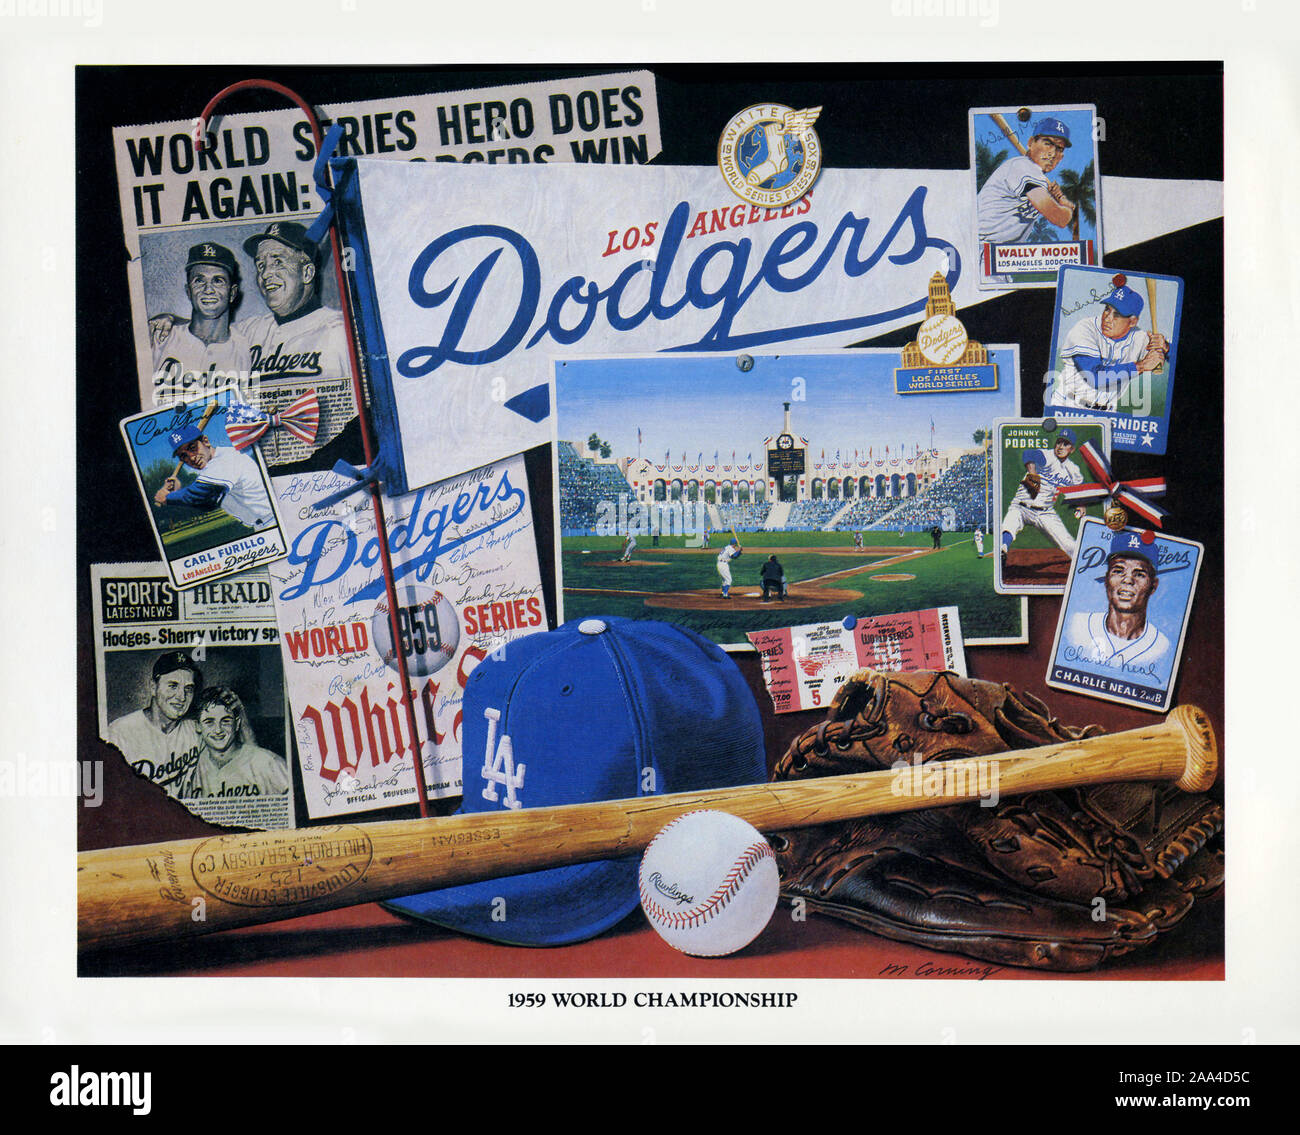 Collage artwork commemorating the Los Angeles Dodgers 1959 World Series Championship season by artist Merv Corning was distributed as prints to fans of the Dodgers. Stock Photo